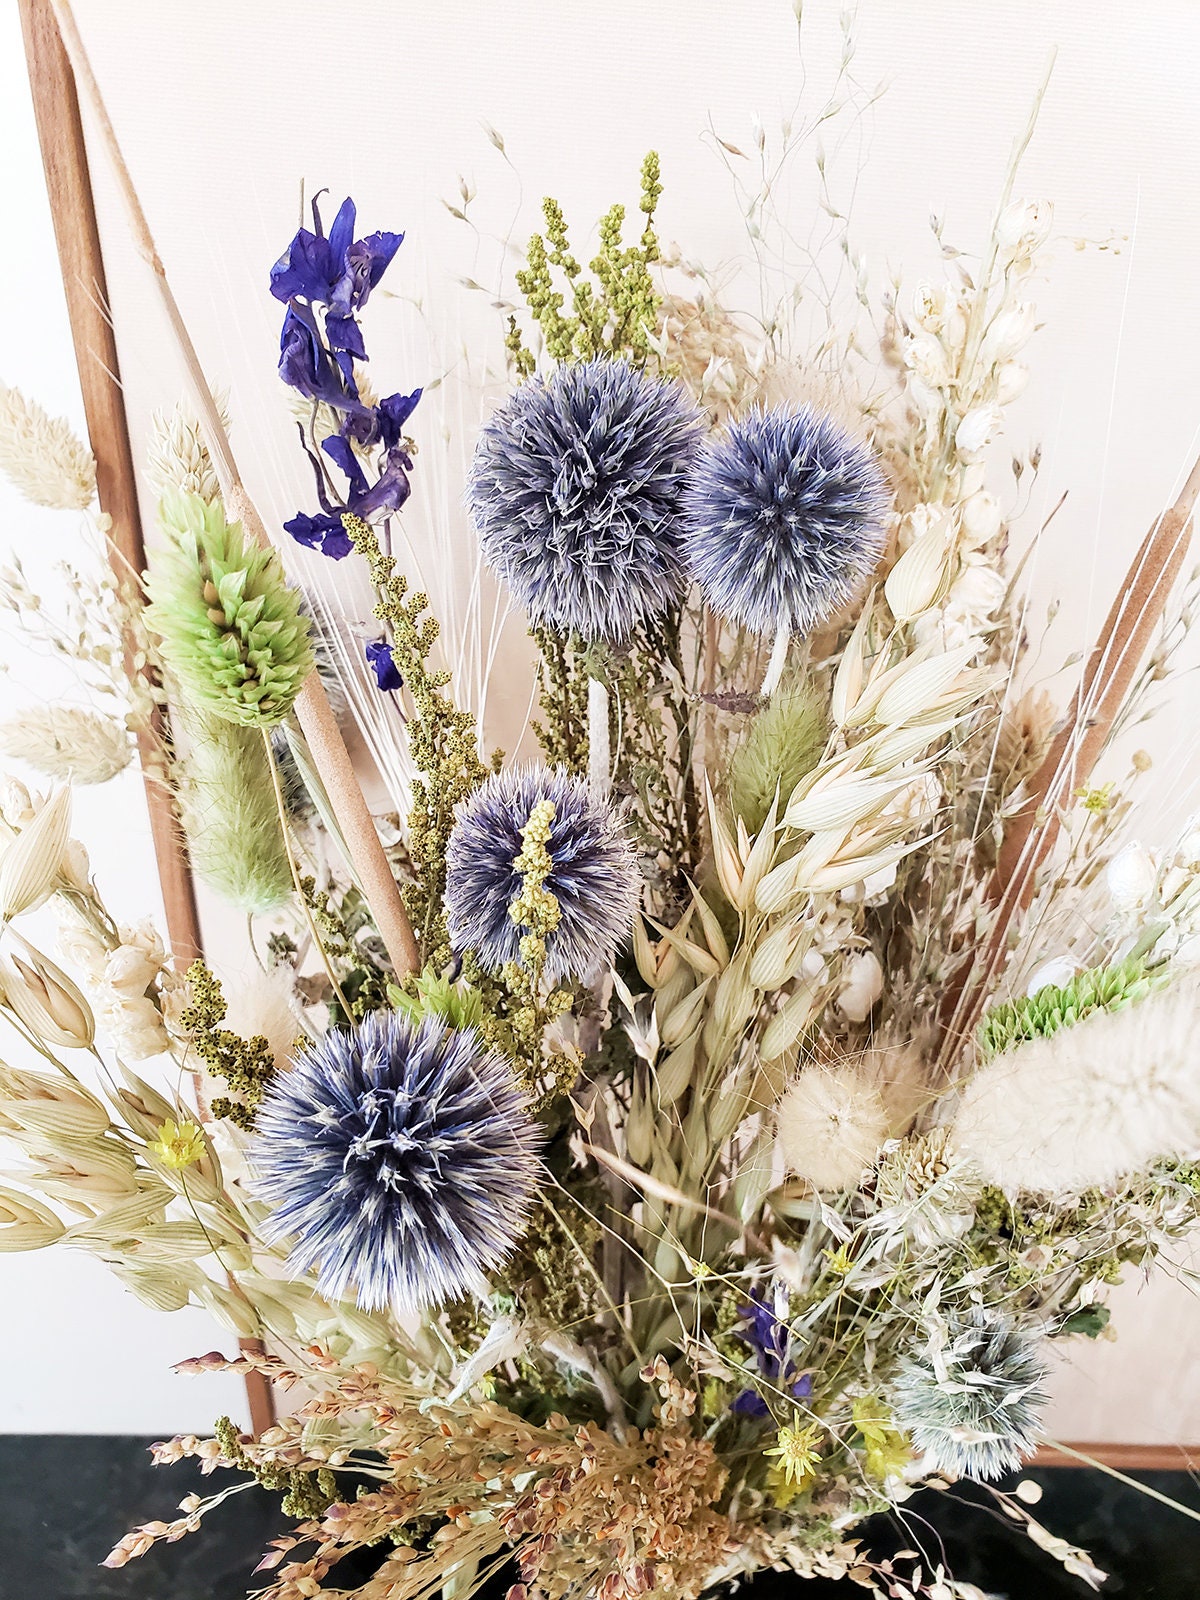 Dried Boho Flower Bouquet made out of Ornamental Grass & Blue Globe Thistles